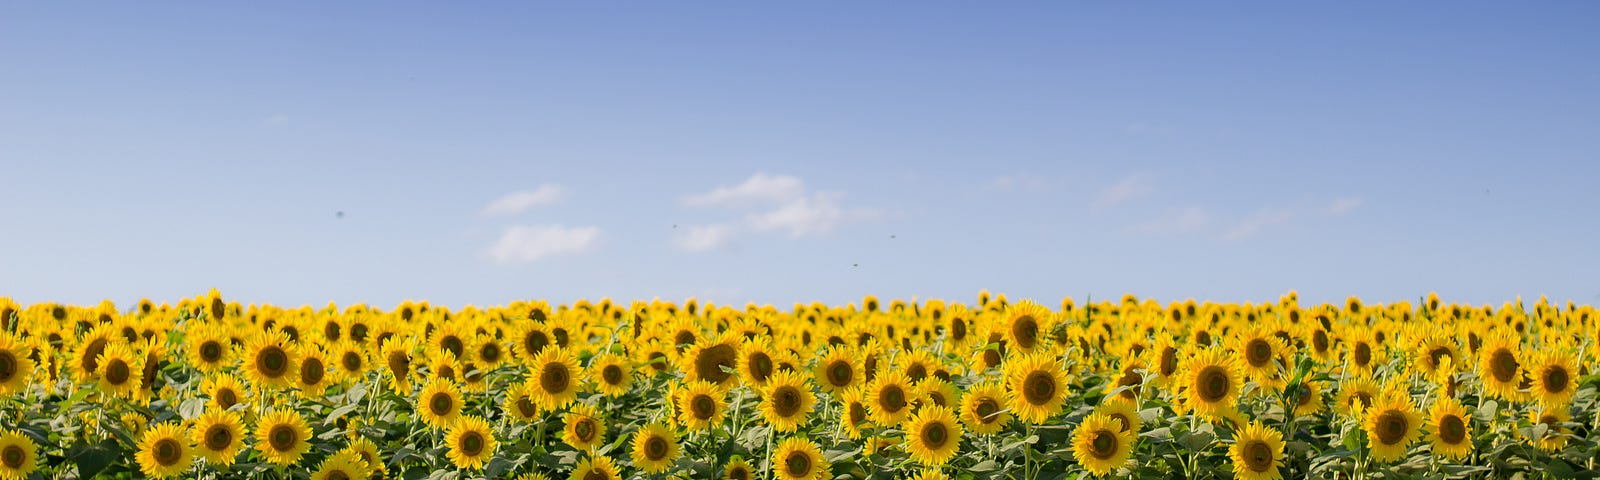 Beautiful sunflower field with a clear blue sky.